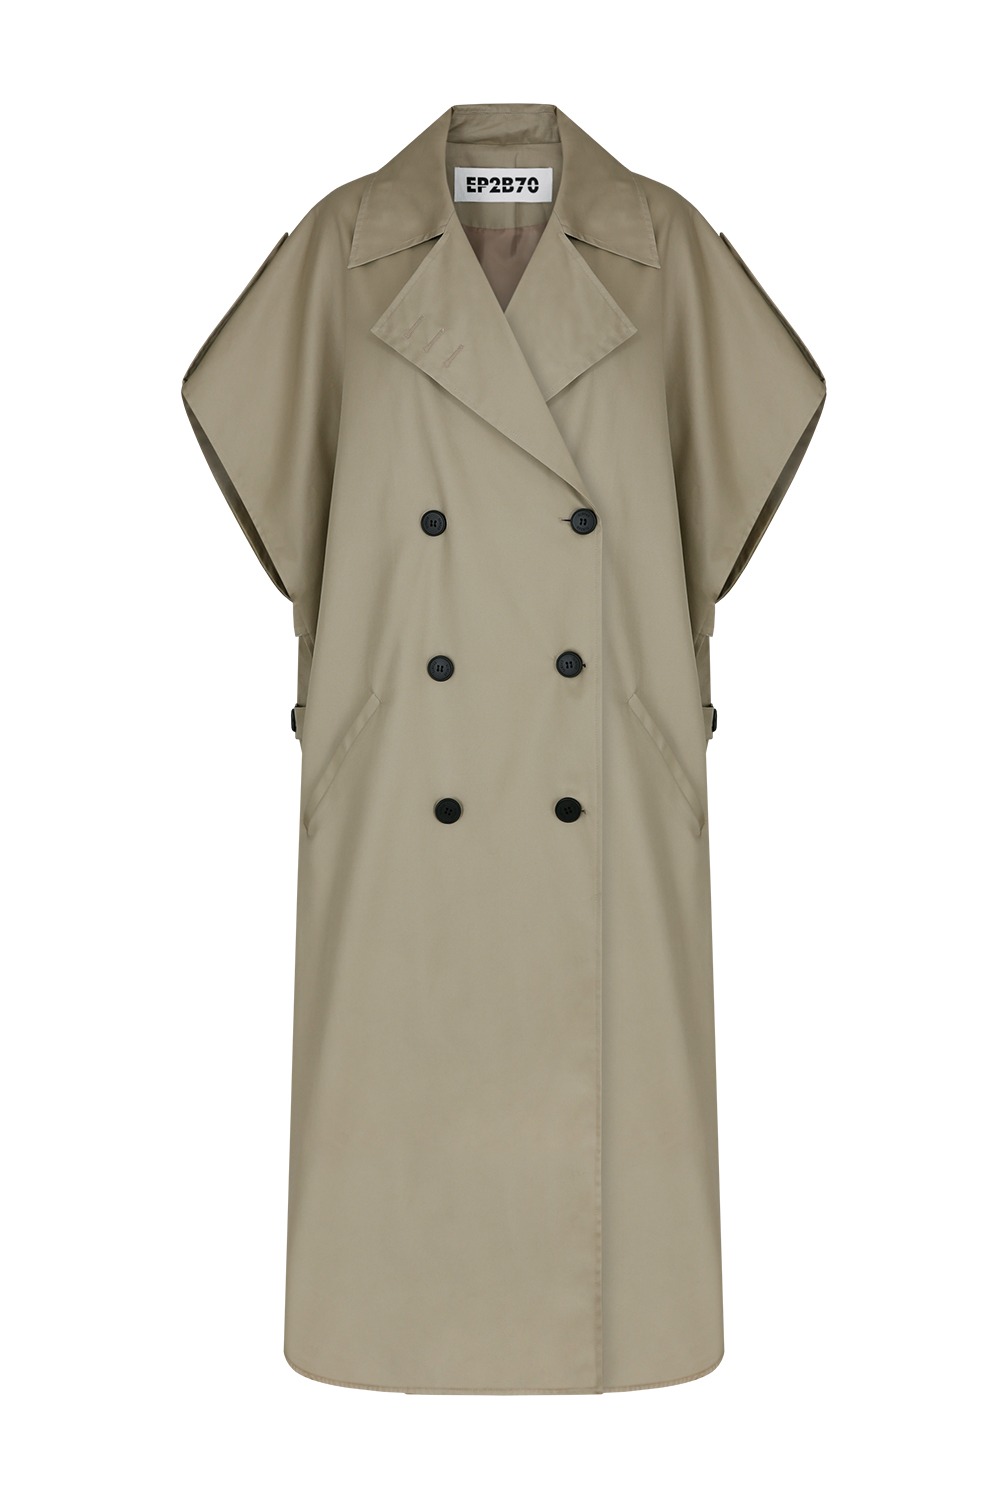 Overfit non-sleeve solid trench coat